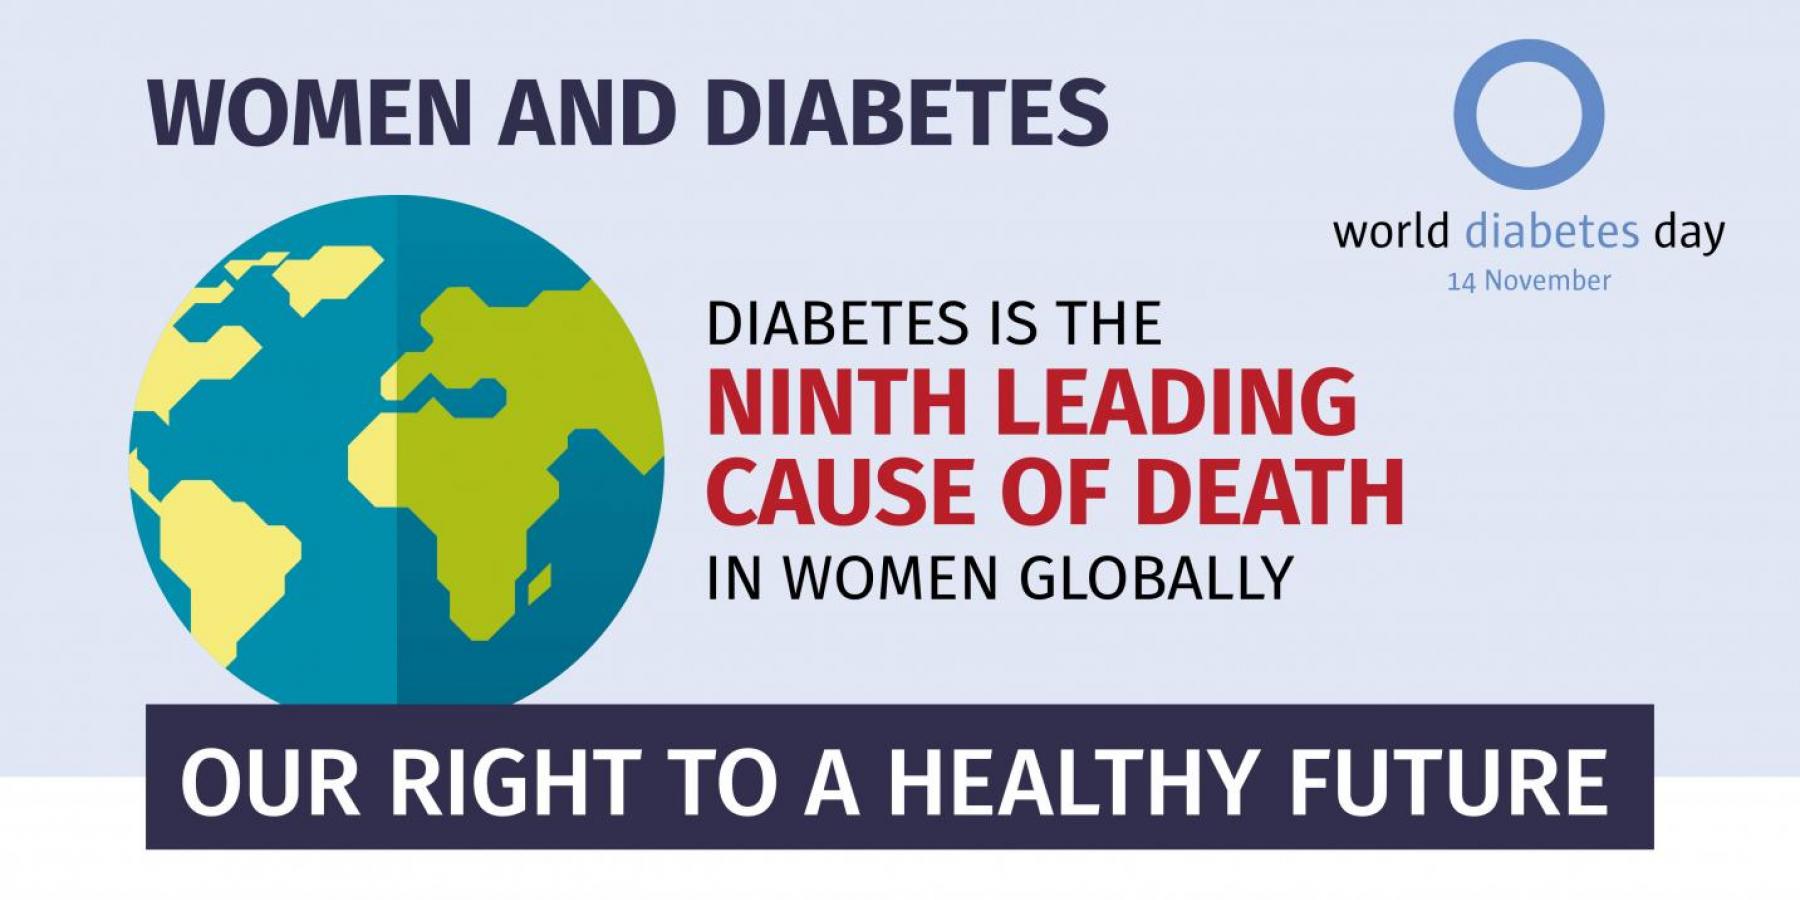 Graphic - Diabetes is 9th leading cause of death of women